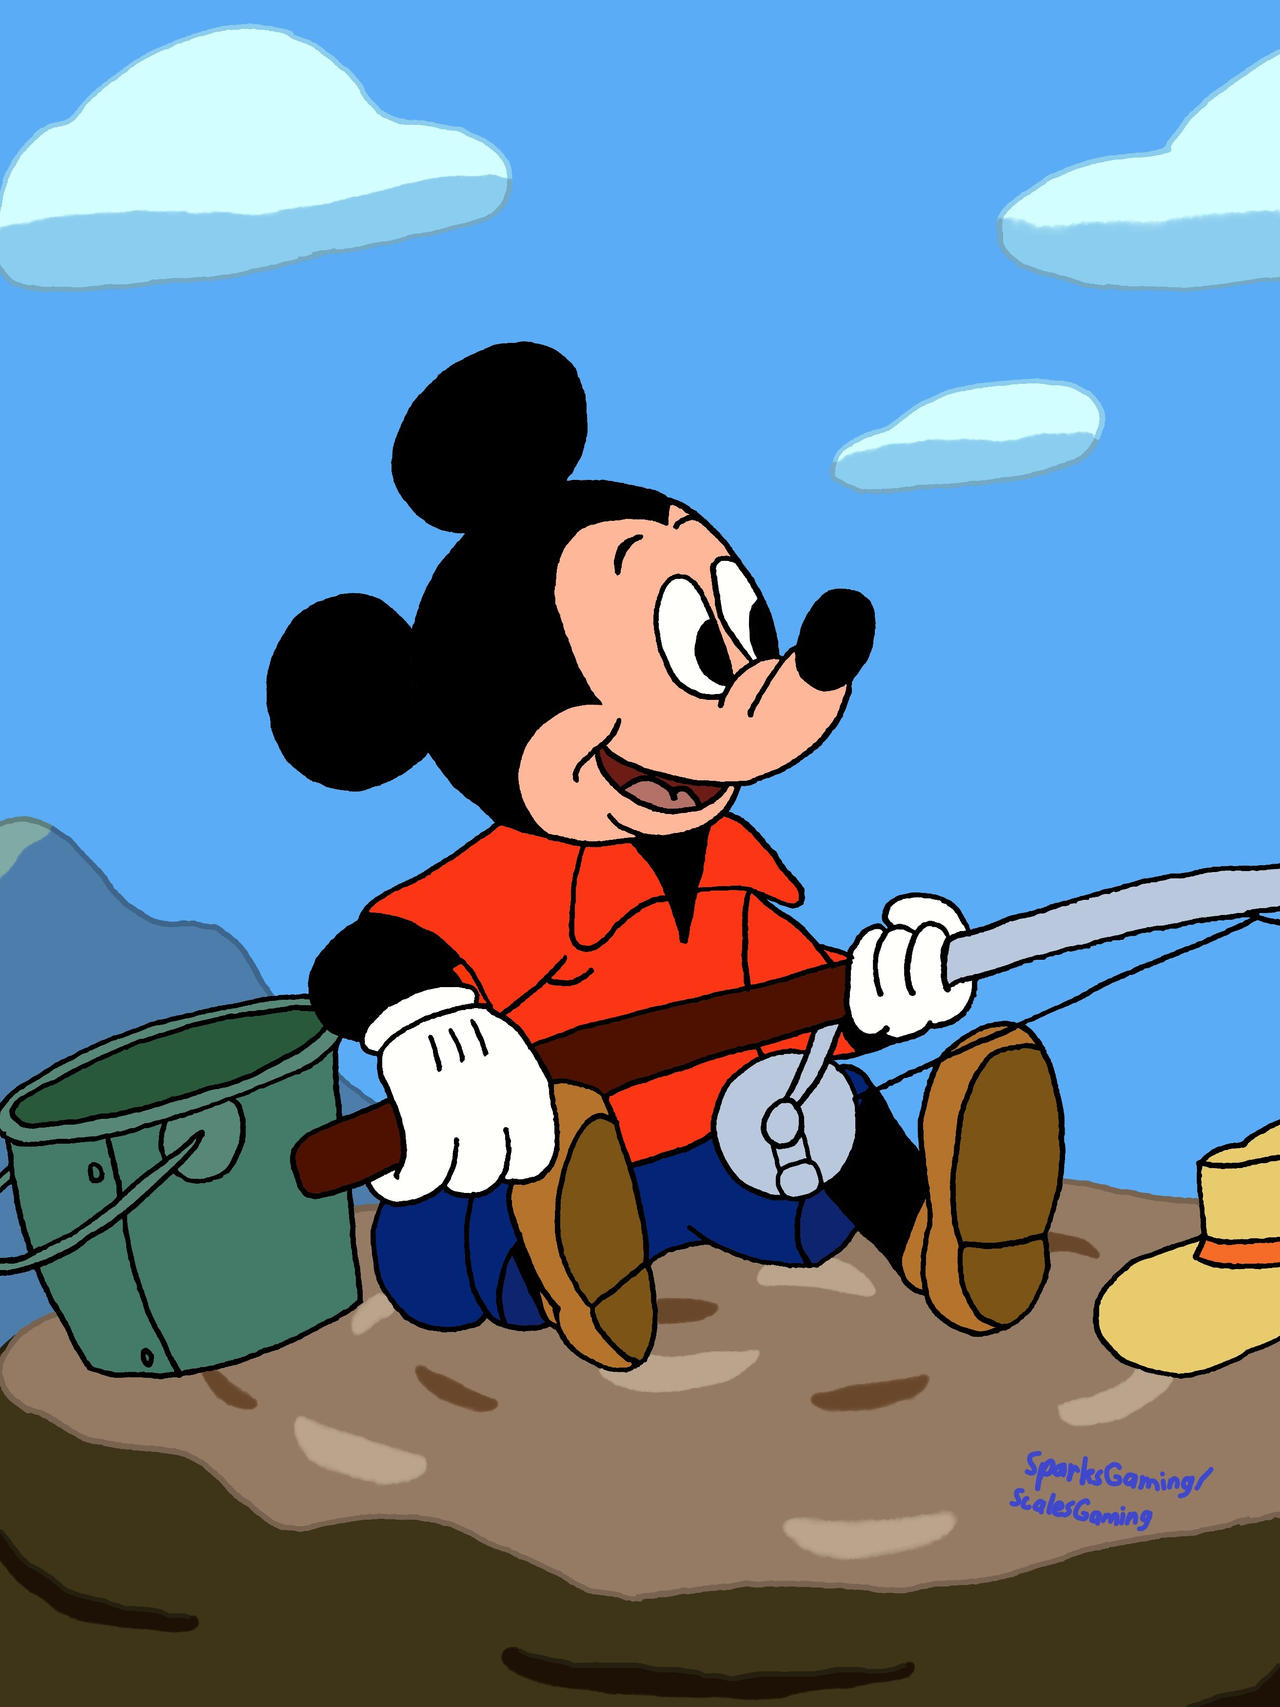 Mickey Mouse - The Simple Things 1953 by StripesGaming05 on DeviantArt